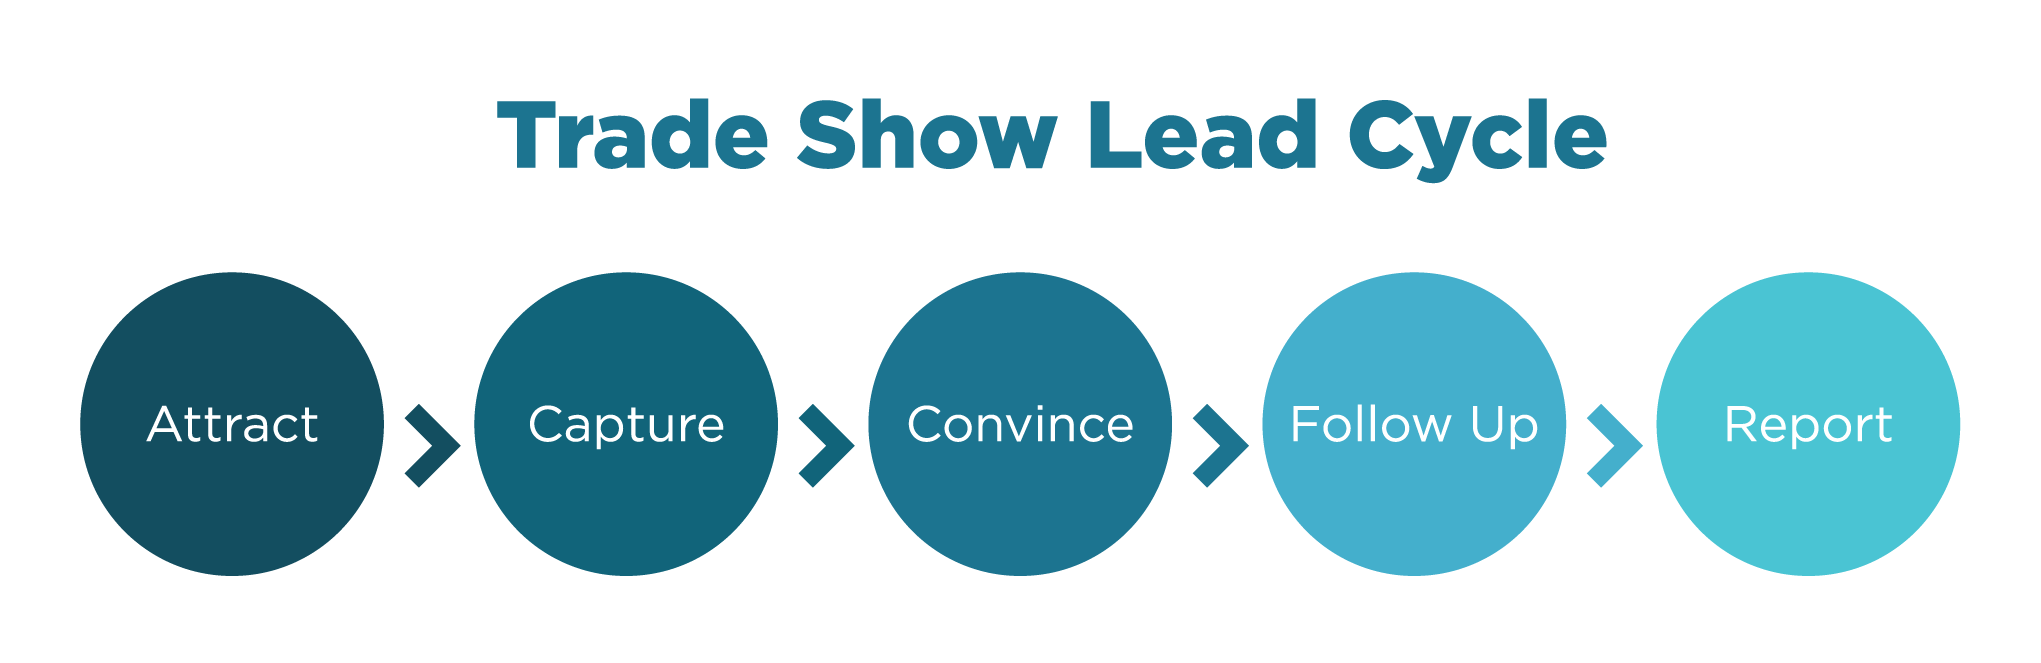 trade show lead cycle infographic 